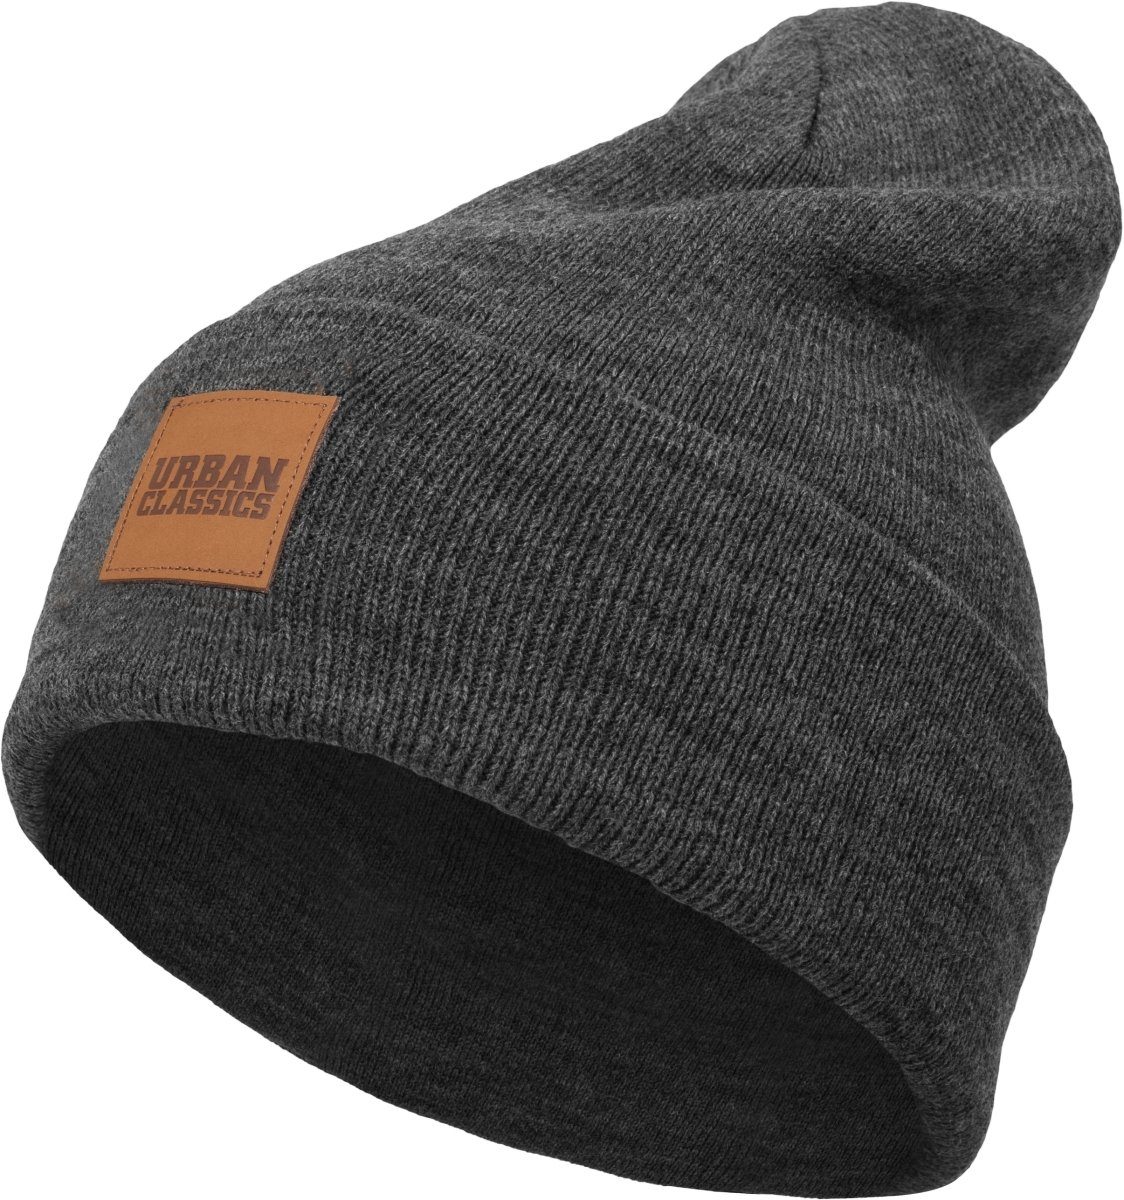 URBAN CLASSICS Beanie Unisex Synthetic Leatherpatch Long Beanie (1-St) charcoal